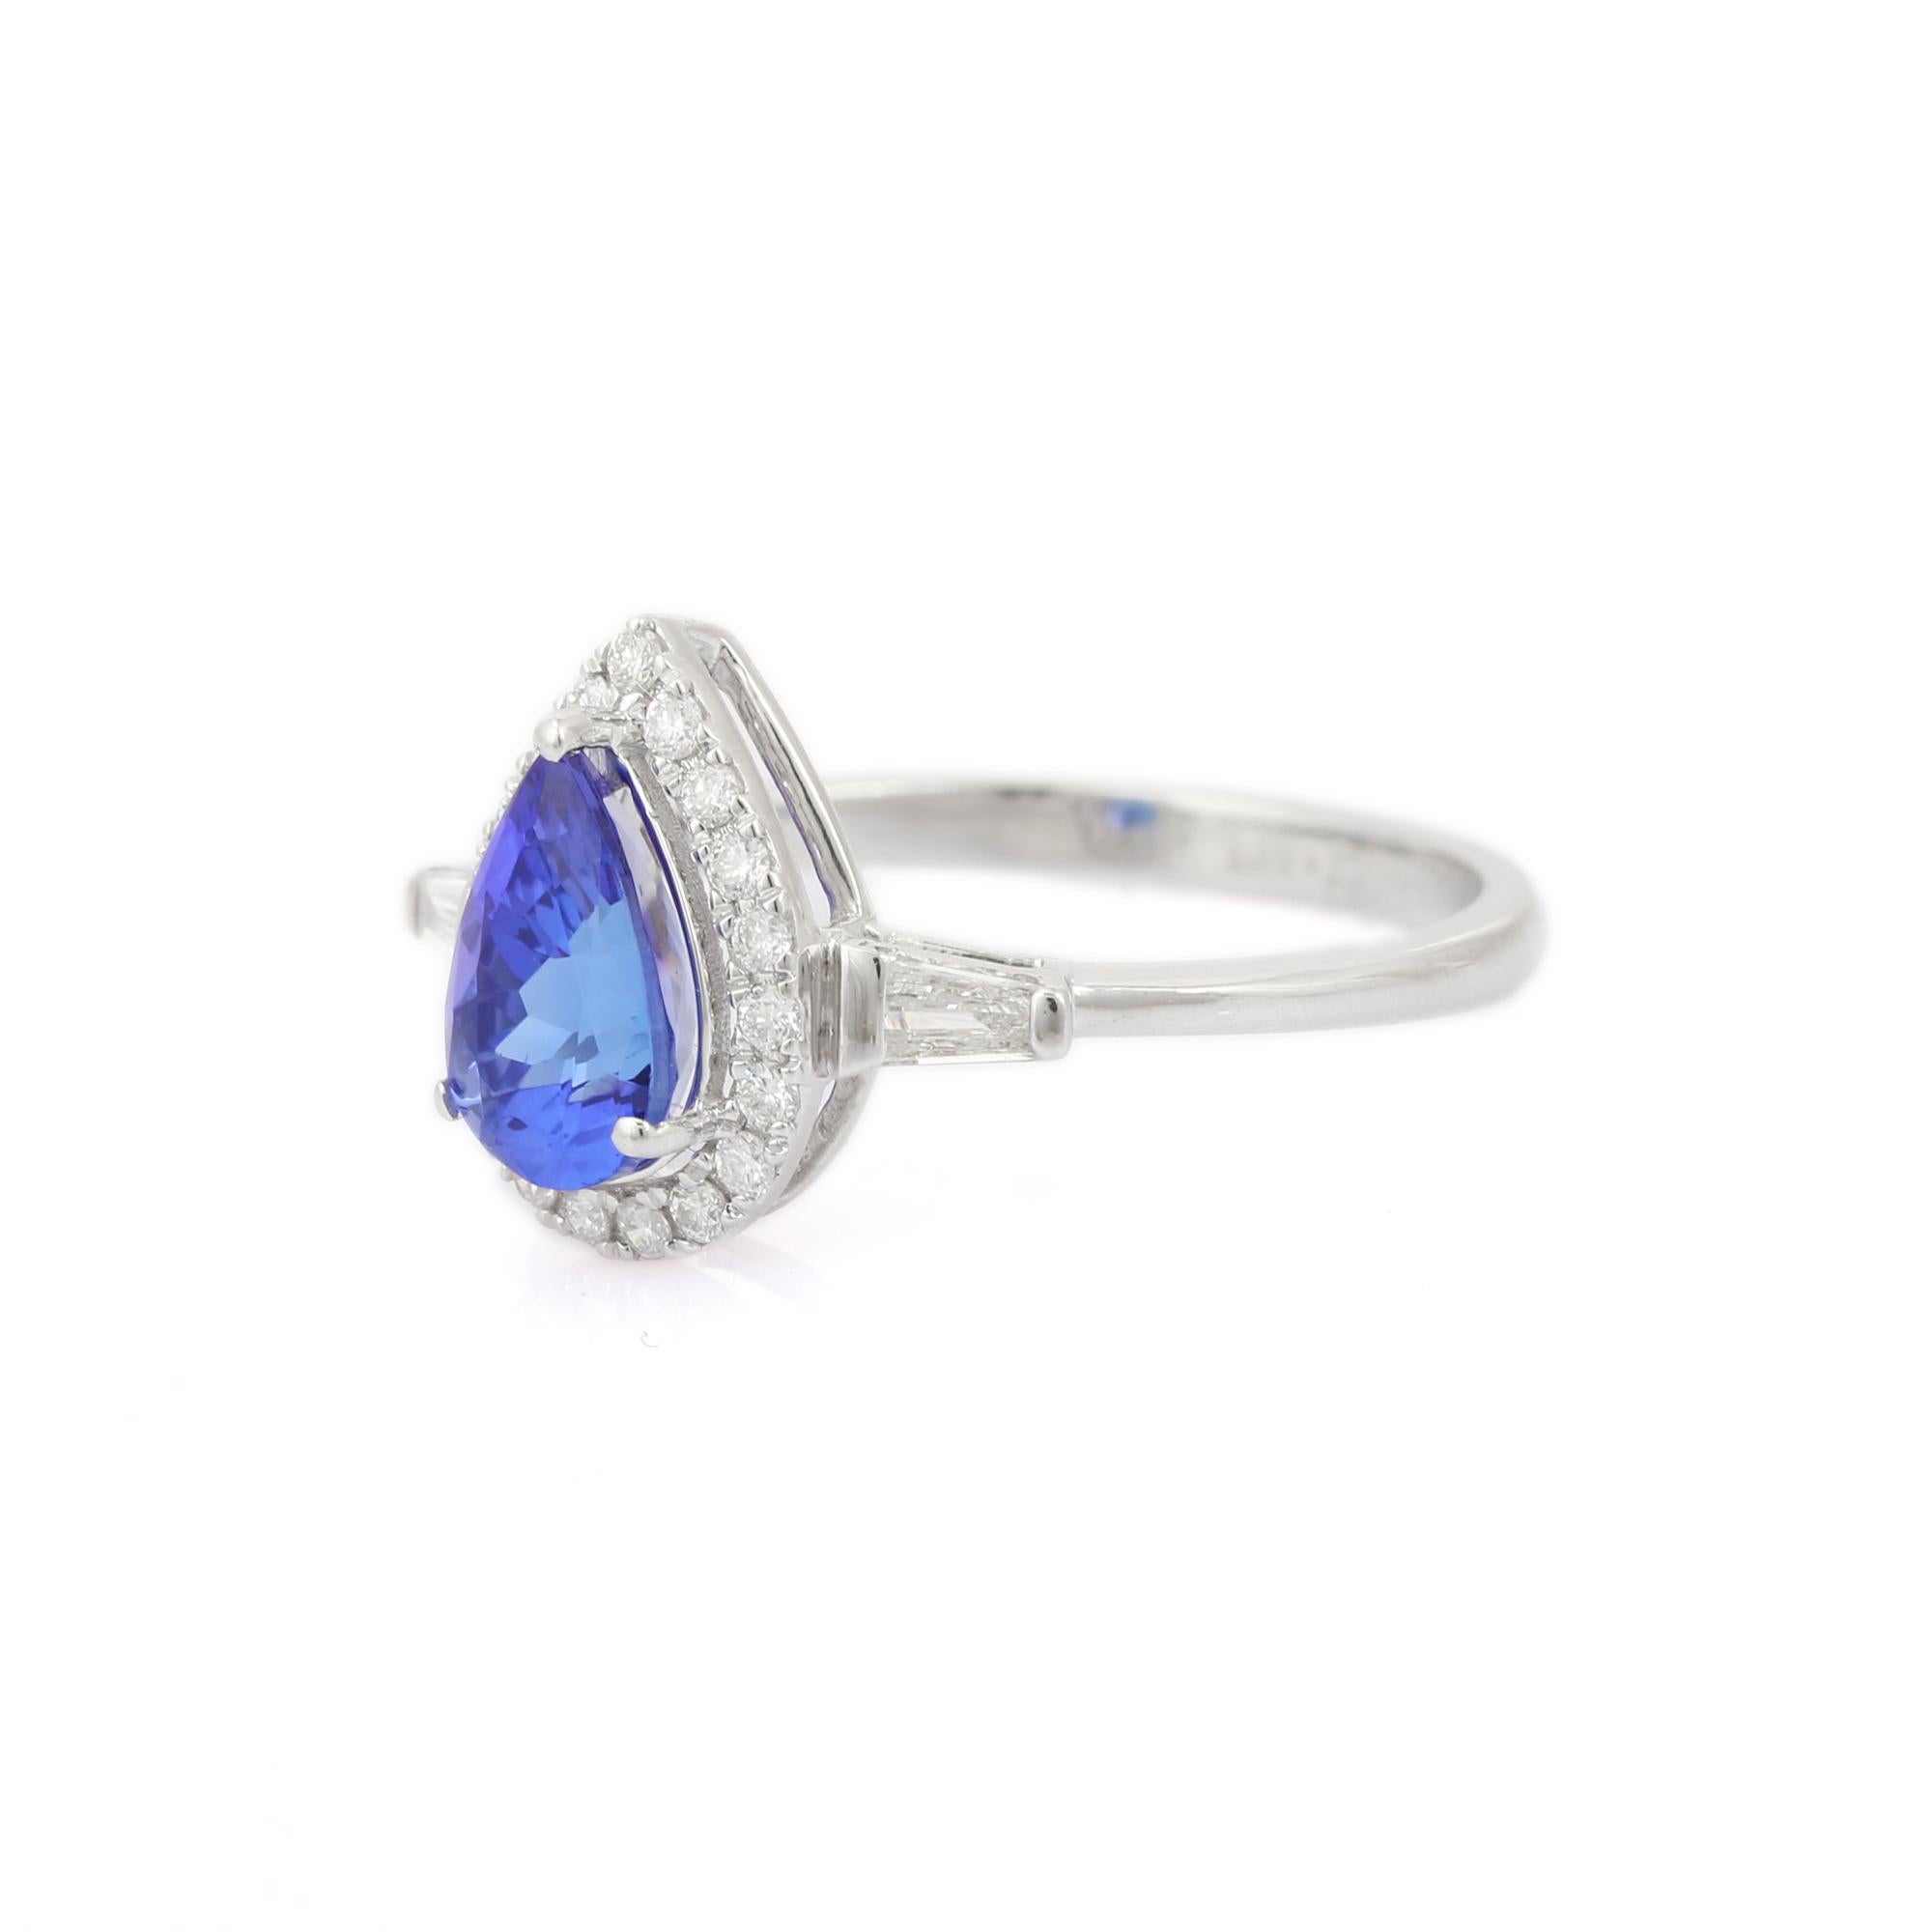 For Sale:  1.1 CTW Pear Shaped Tanzanite and Diamond Ring in 18k Solid White Gold 2